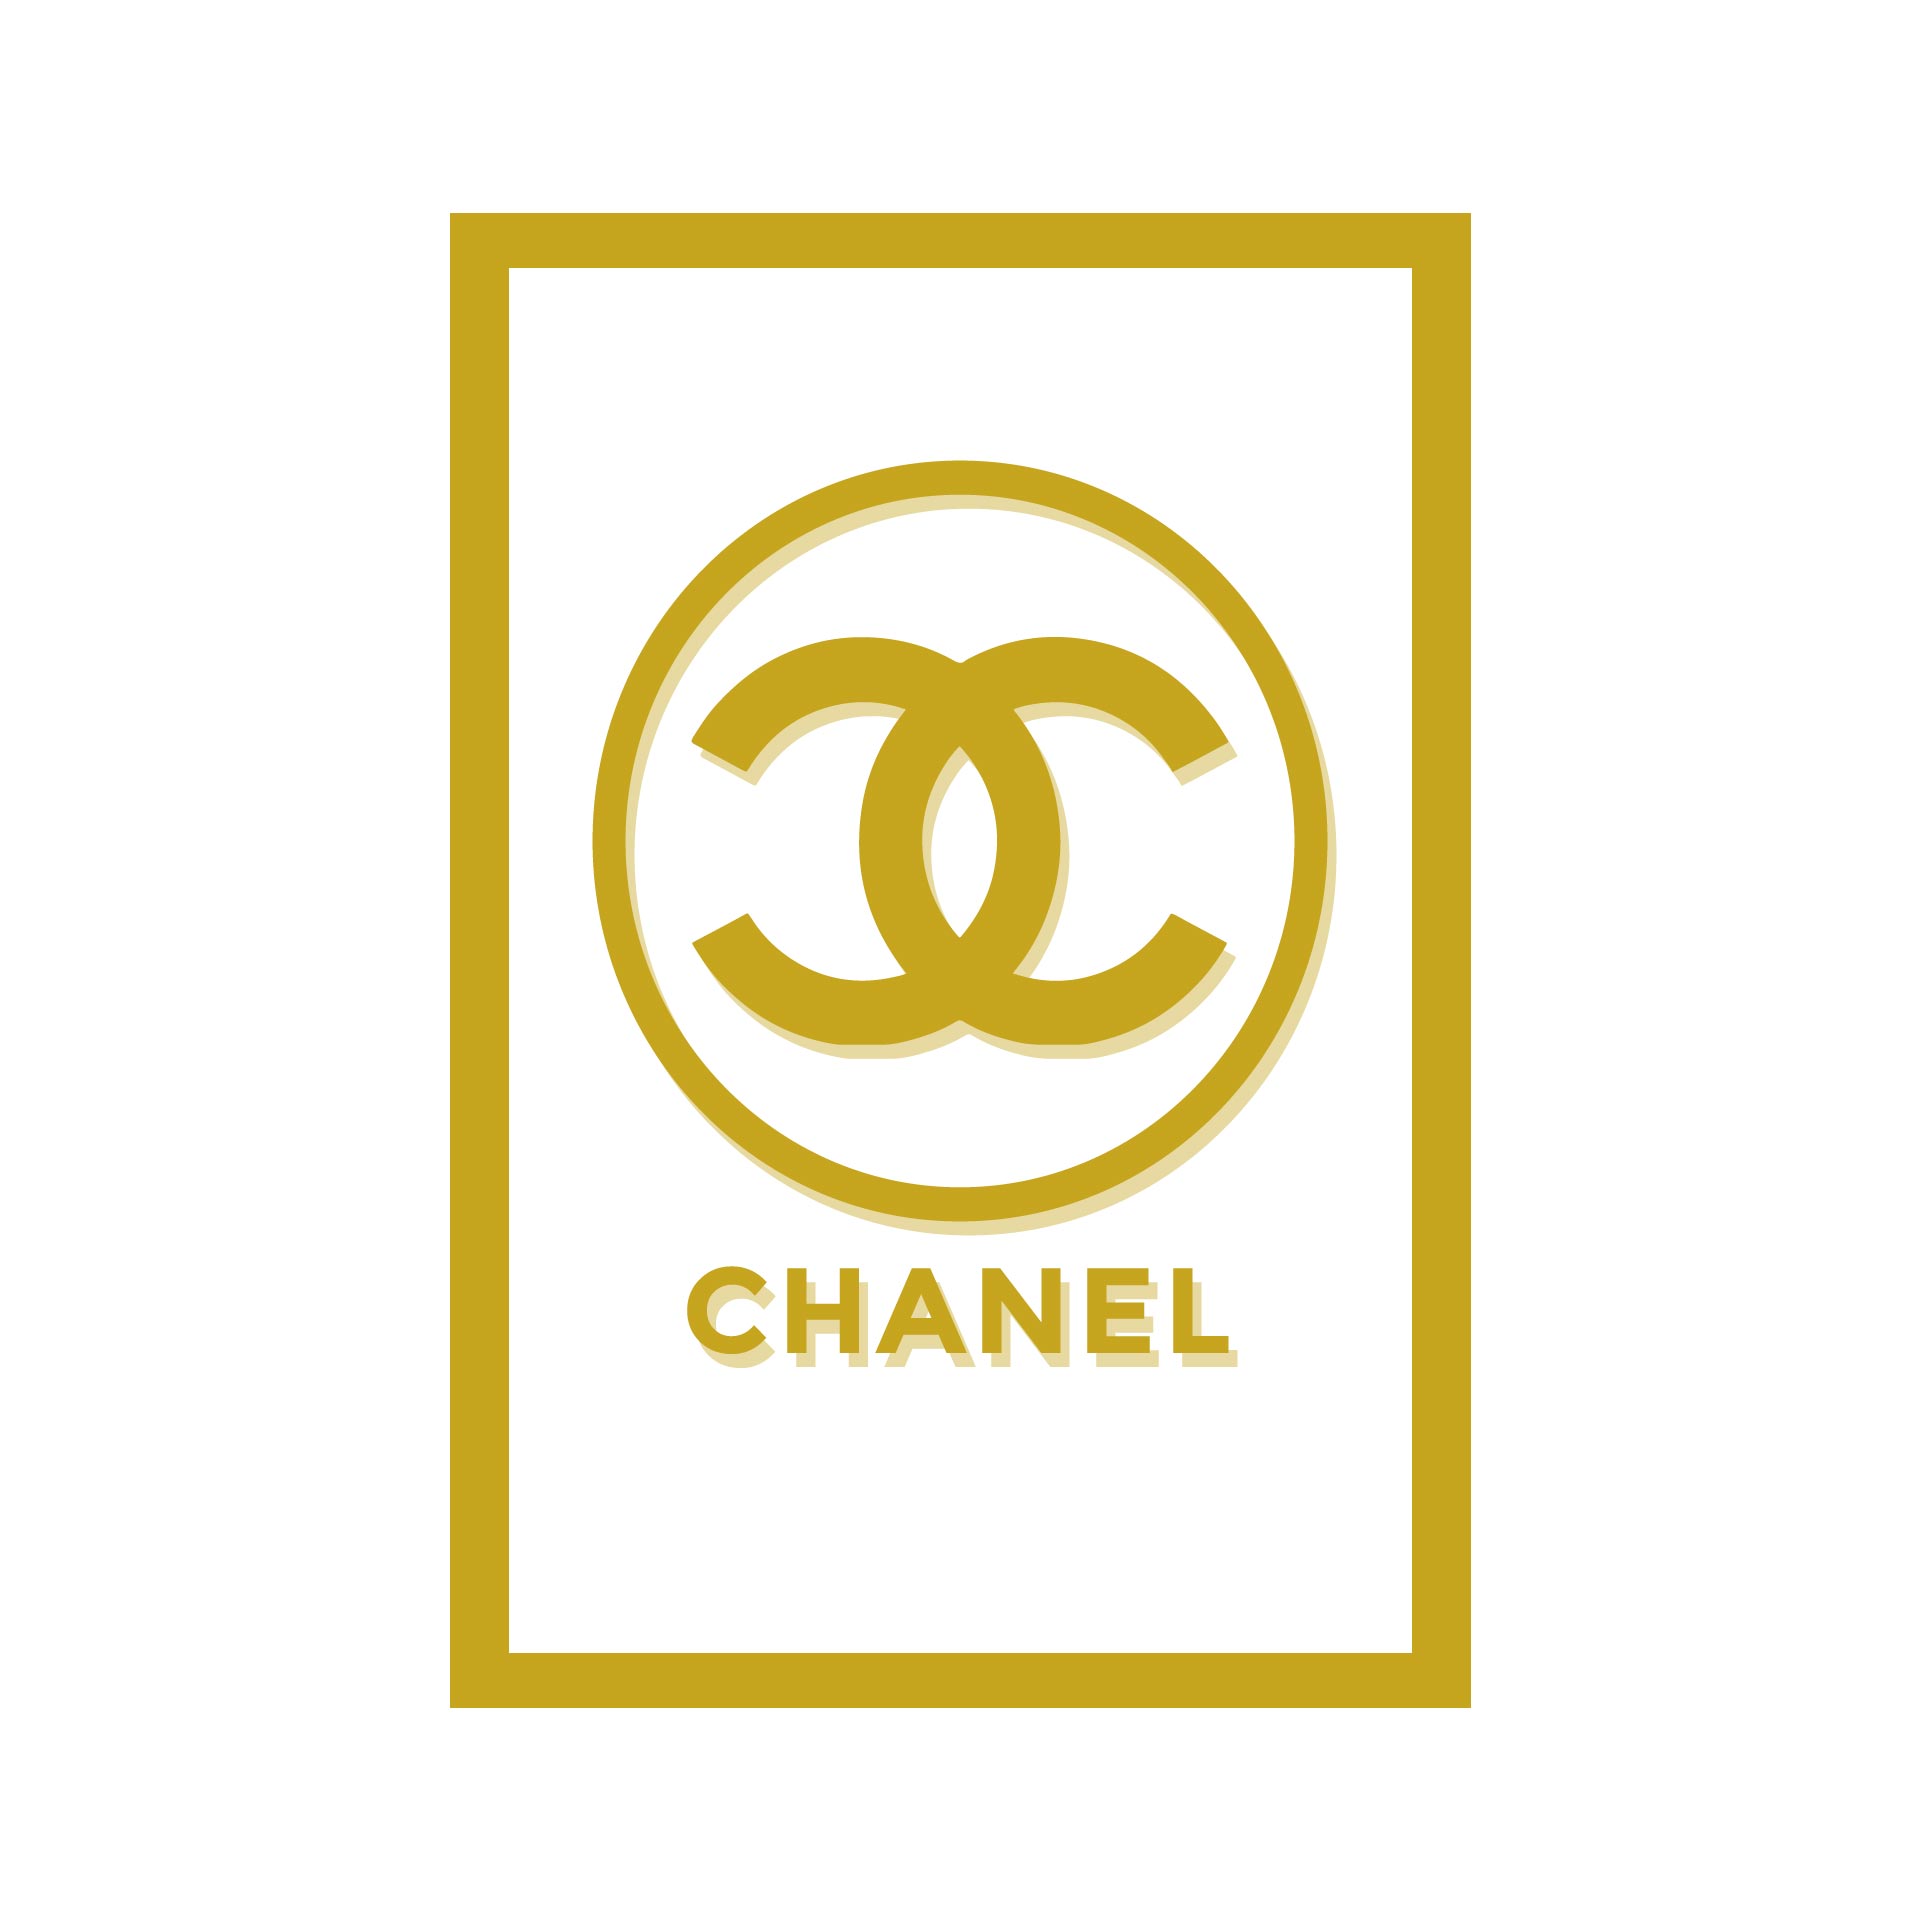 8 Best Images of Chanel Wall Art Free Printable - Coco Chanel Logo Clip ...